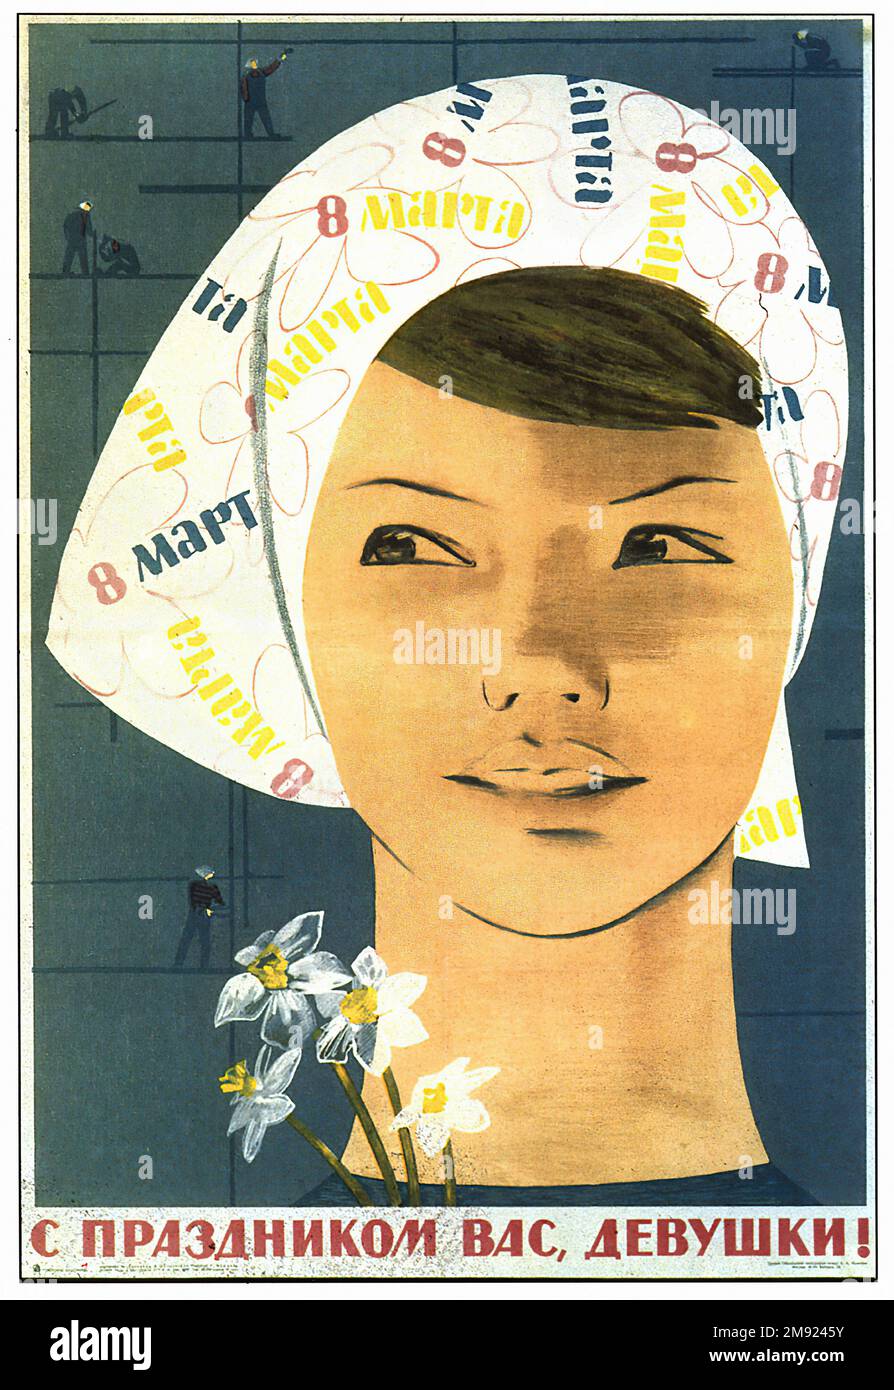 Vacation Time! (Translated from Russian) - Vintage USSR soviet propaganda poster Stock Photo